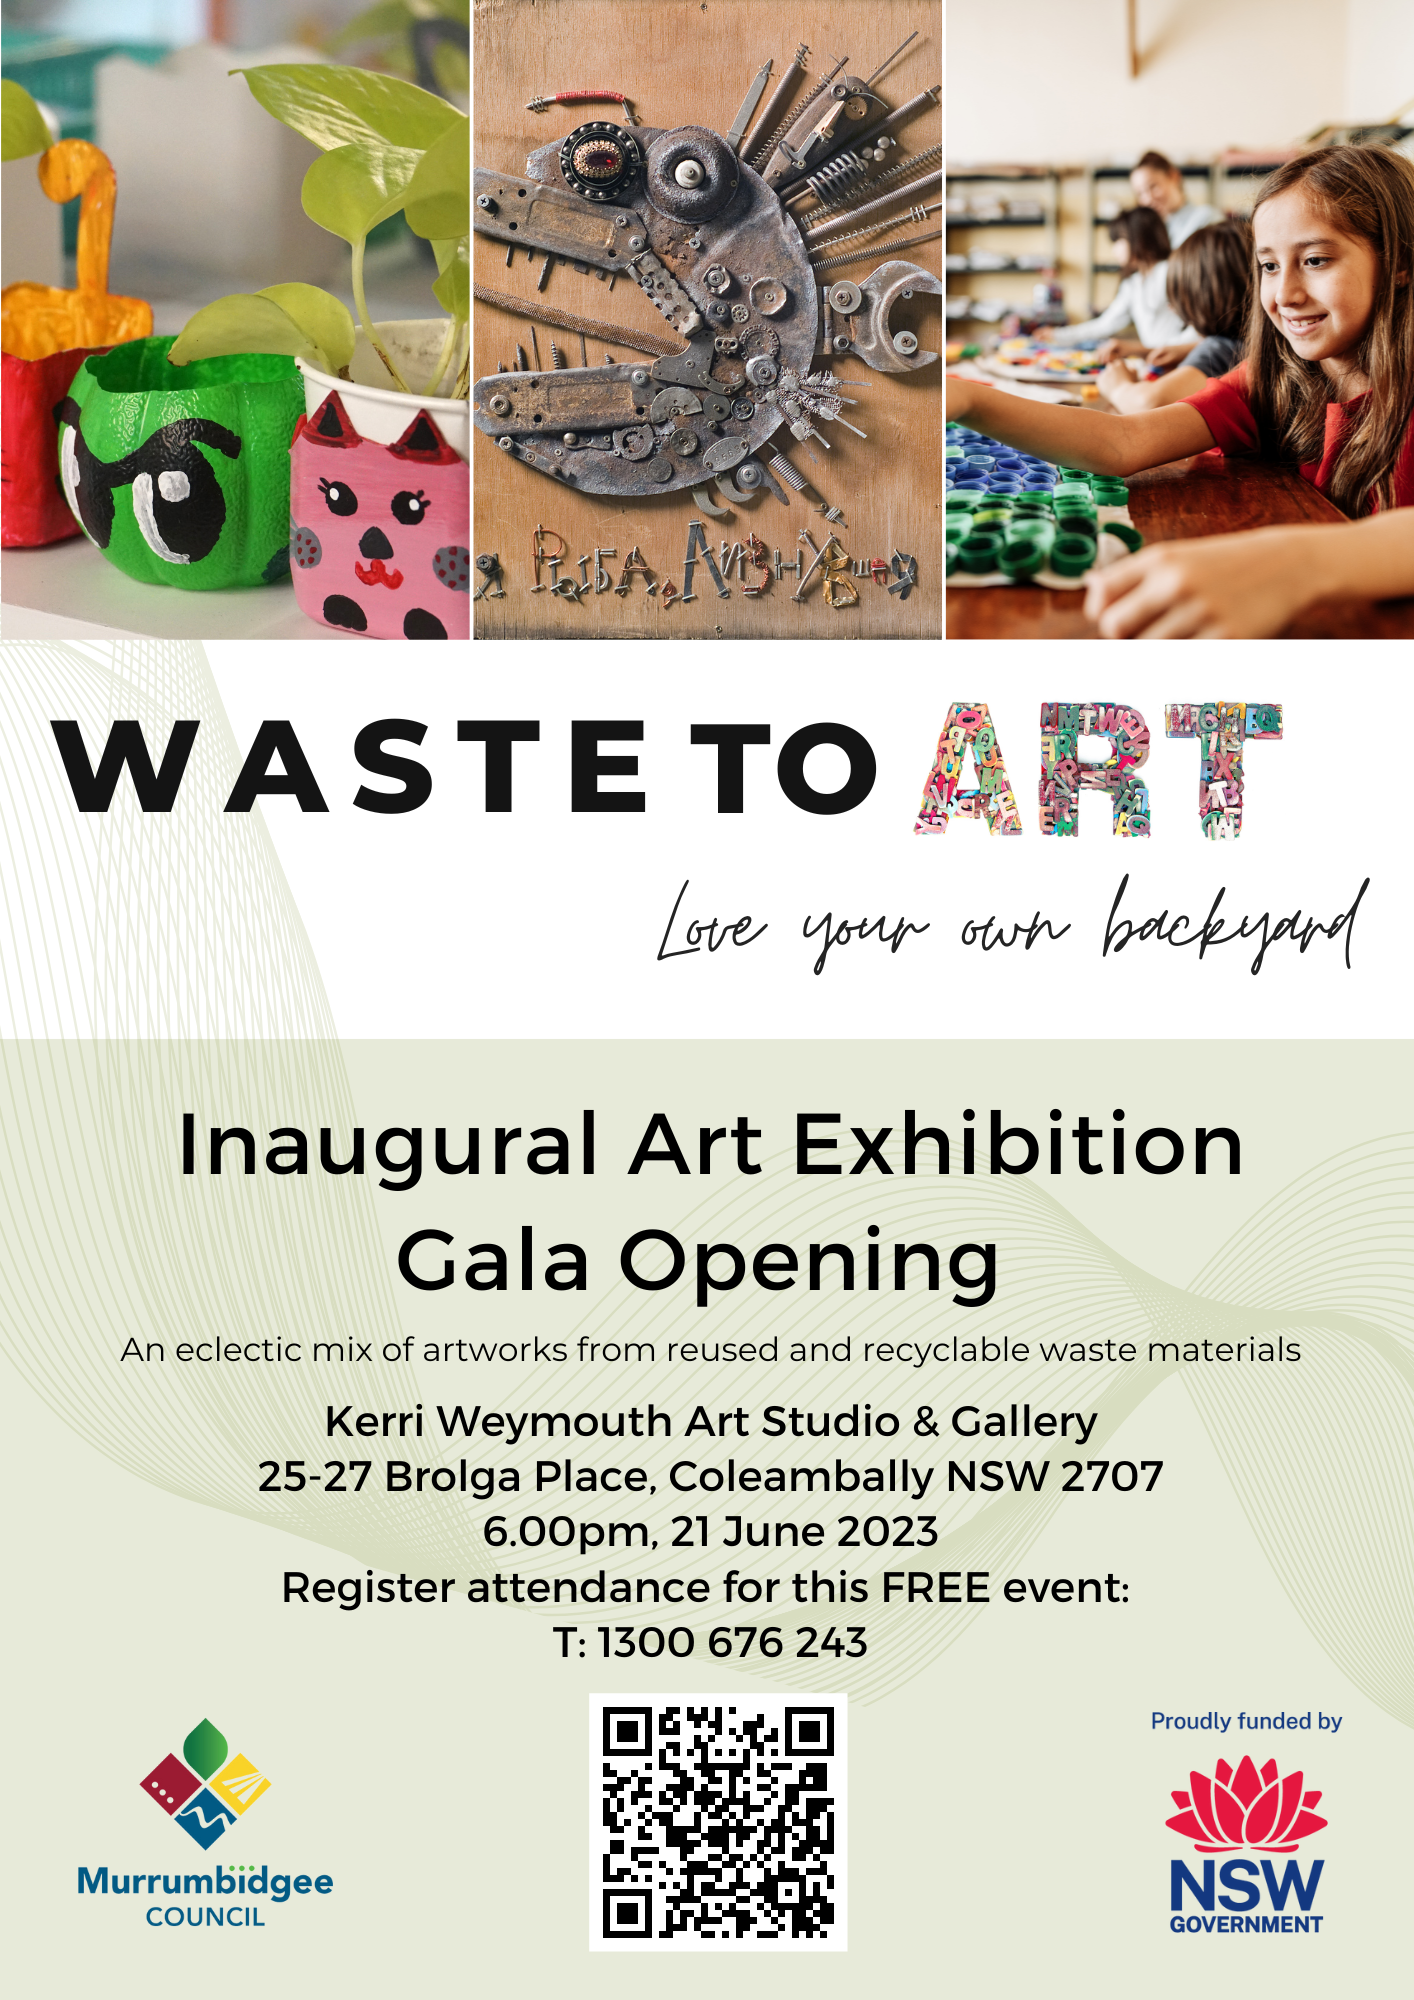 Waste to Art Inaugural Art Exhibition Gala Opening